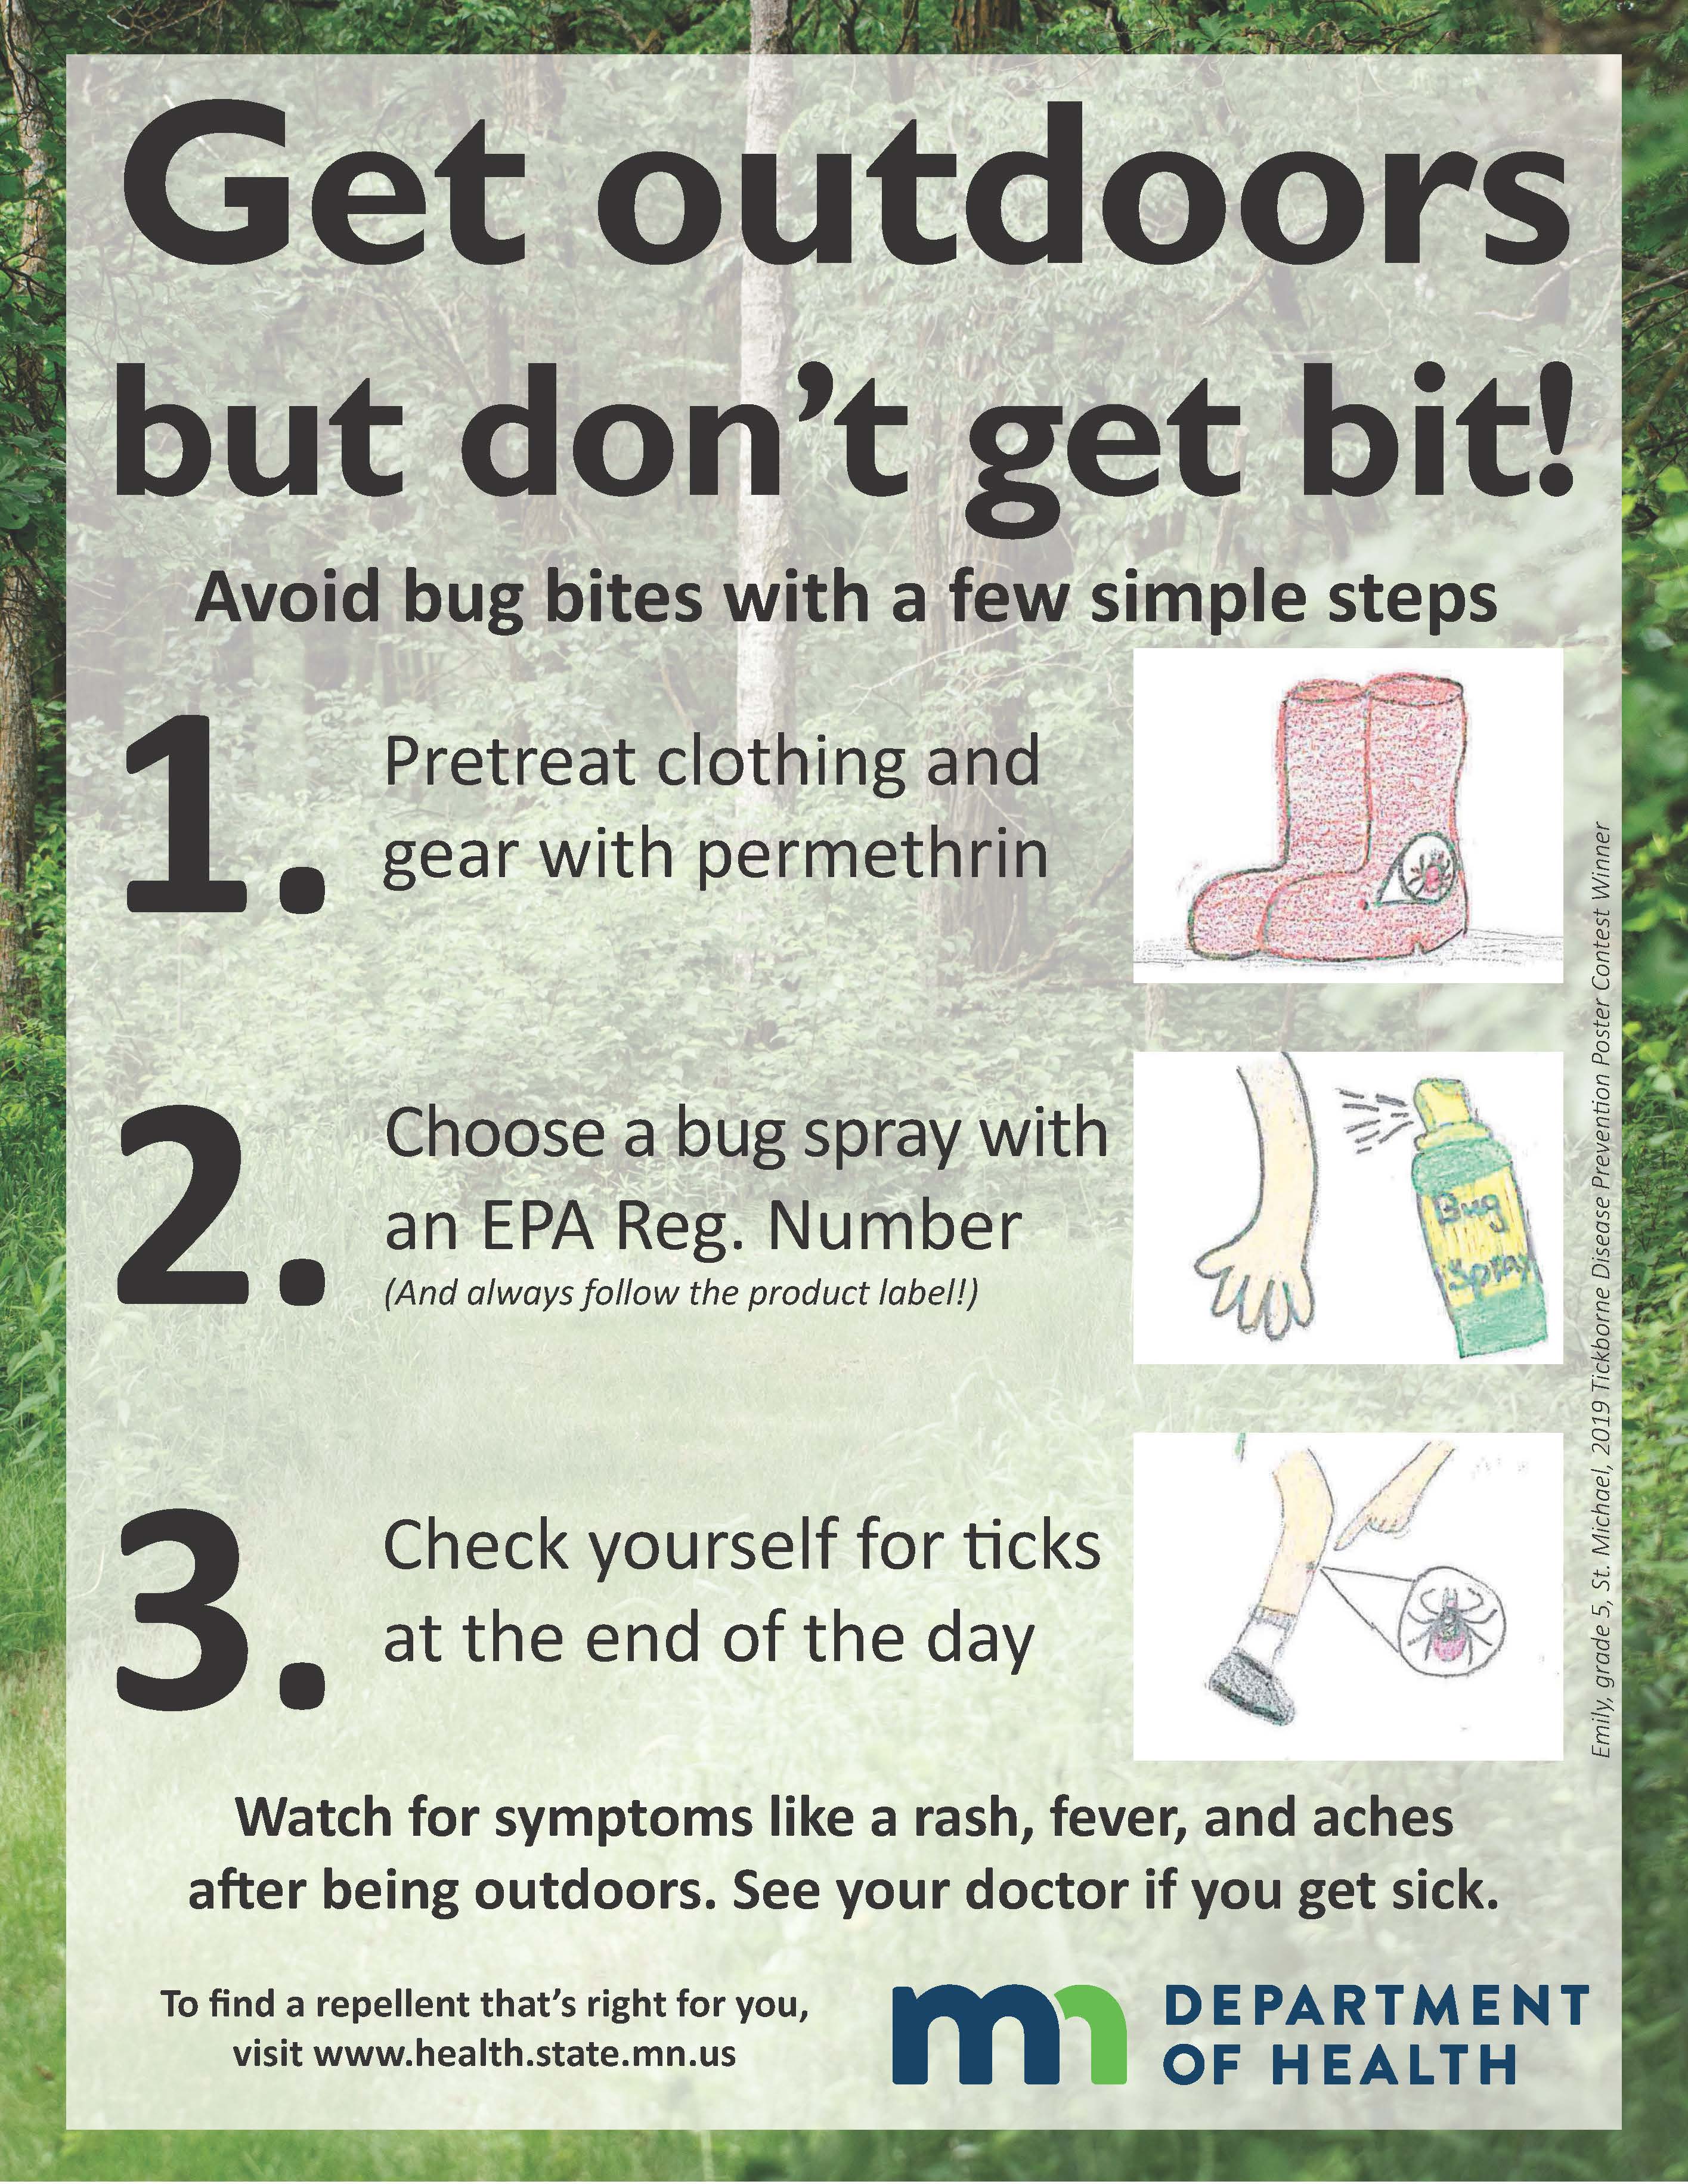 Get outdoors don't get bit poster detailing prevention steps like wear sub spray and check yourself for ticks.